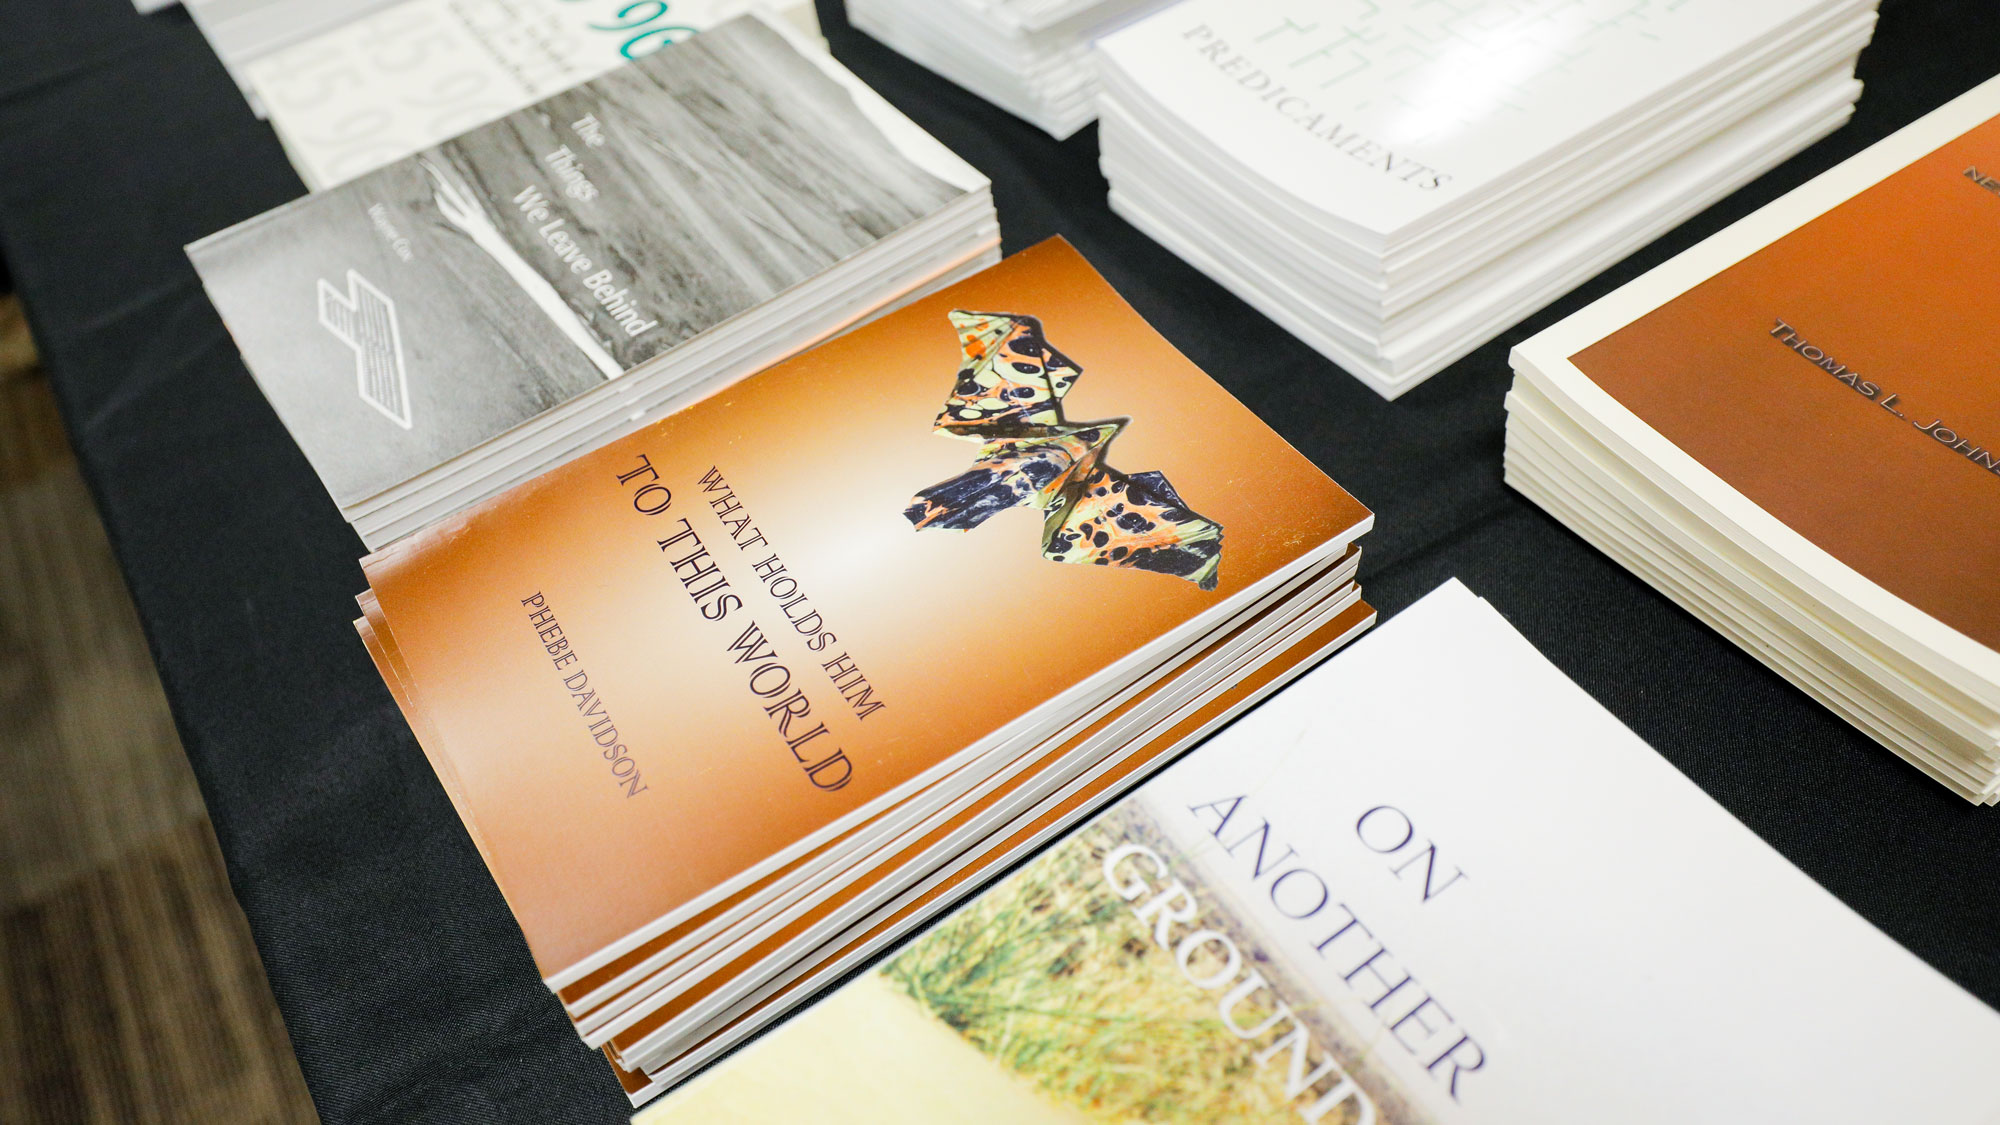 Books and pamphlets on a table